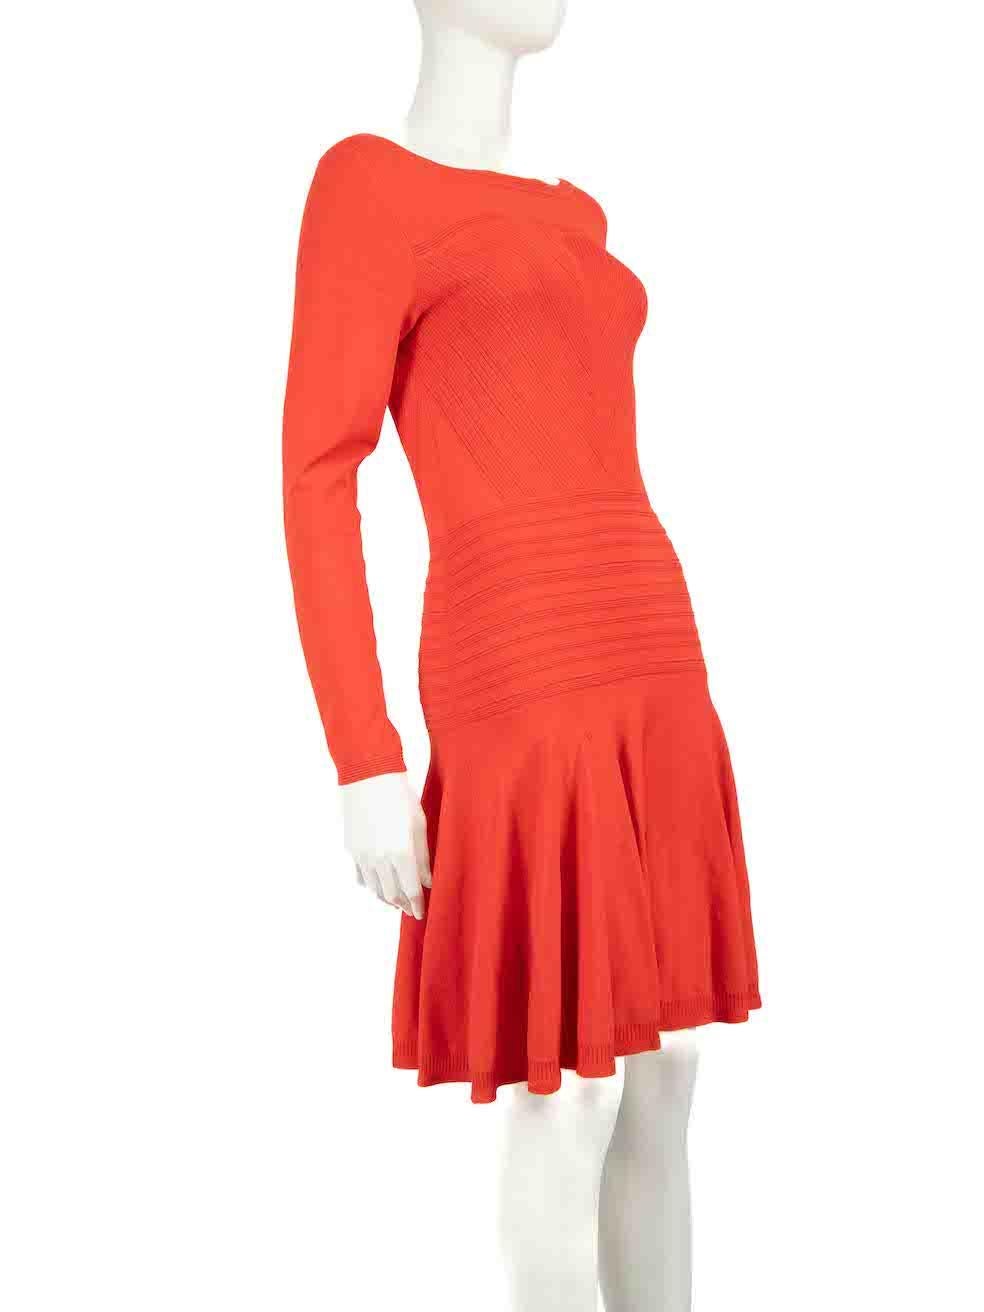 CONDITION is Very good. Minimal wear to the dress is evident. Minimal wear to the dress is seen with pulls to the weave especially in the front, above the hemline and back on this used Diane Von Furstenberg designer resale item.
 
 
 
 Details
 
 
